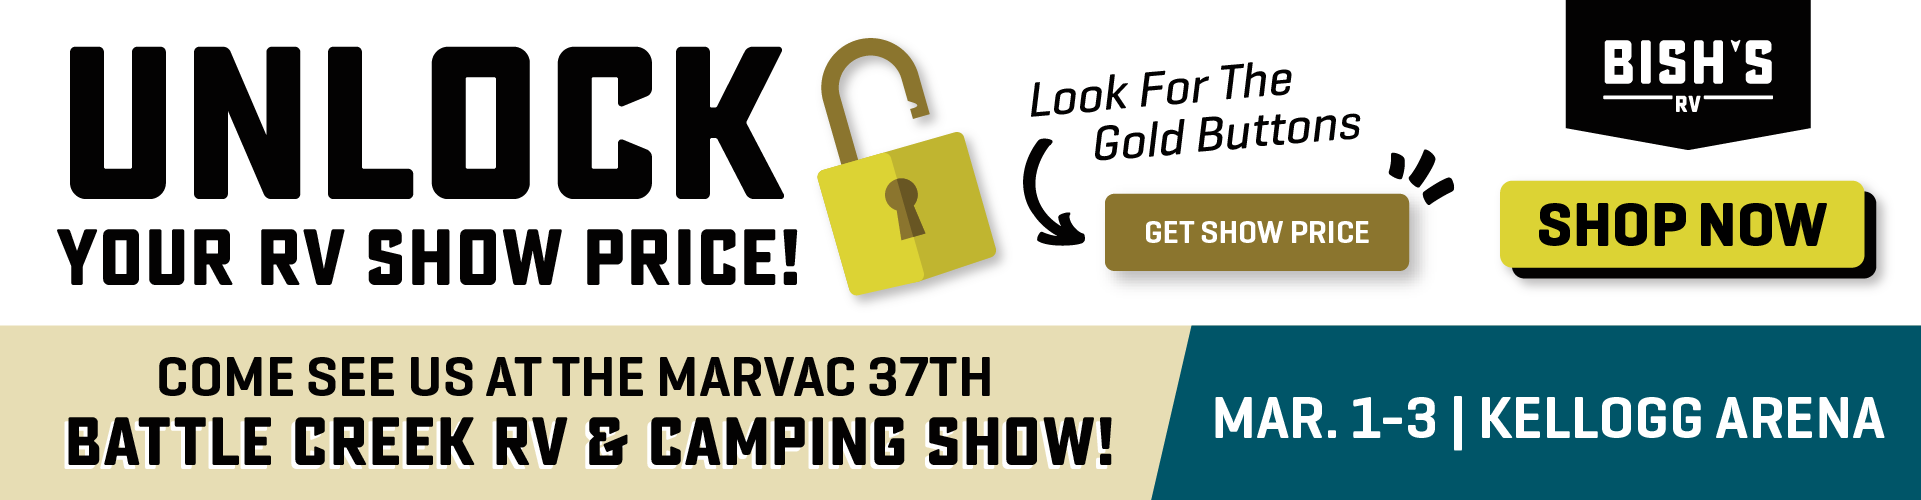 Unlock Your RV Show Price! Come to the MARVAC 37th Battle Creek RV & Camping Show -March 1-3 - Kellogg Arena